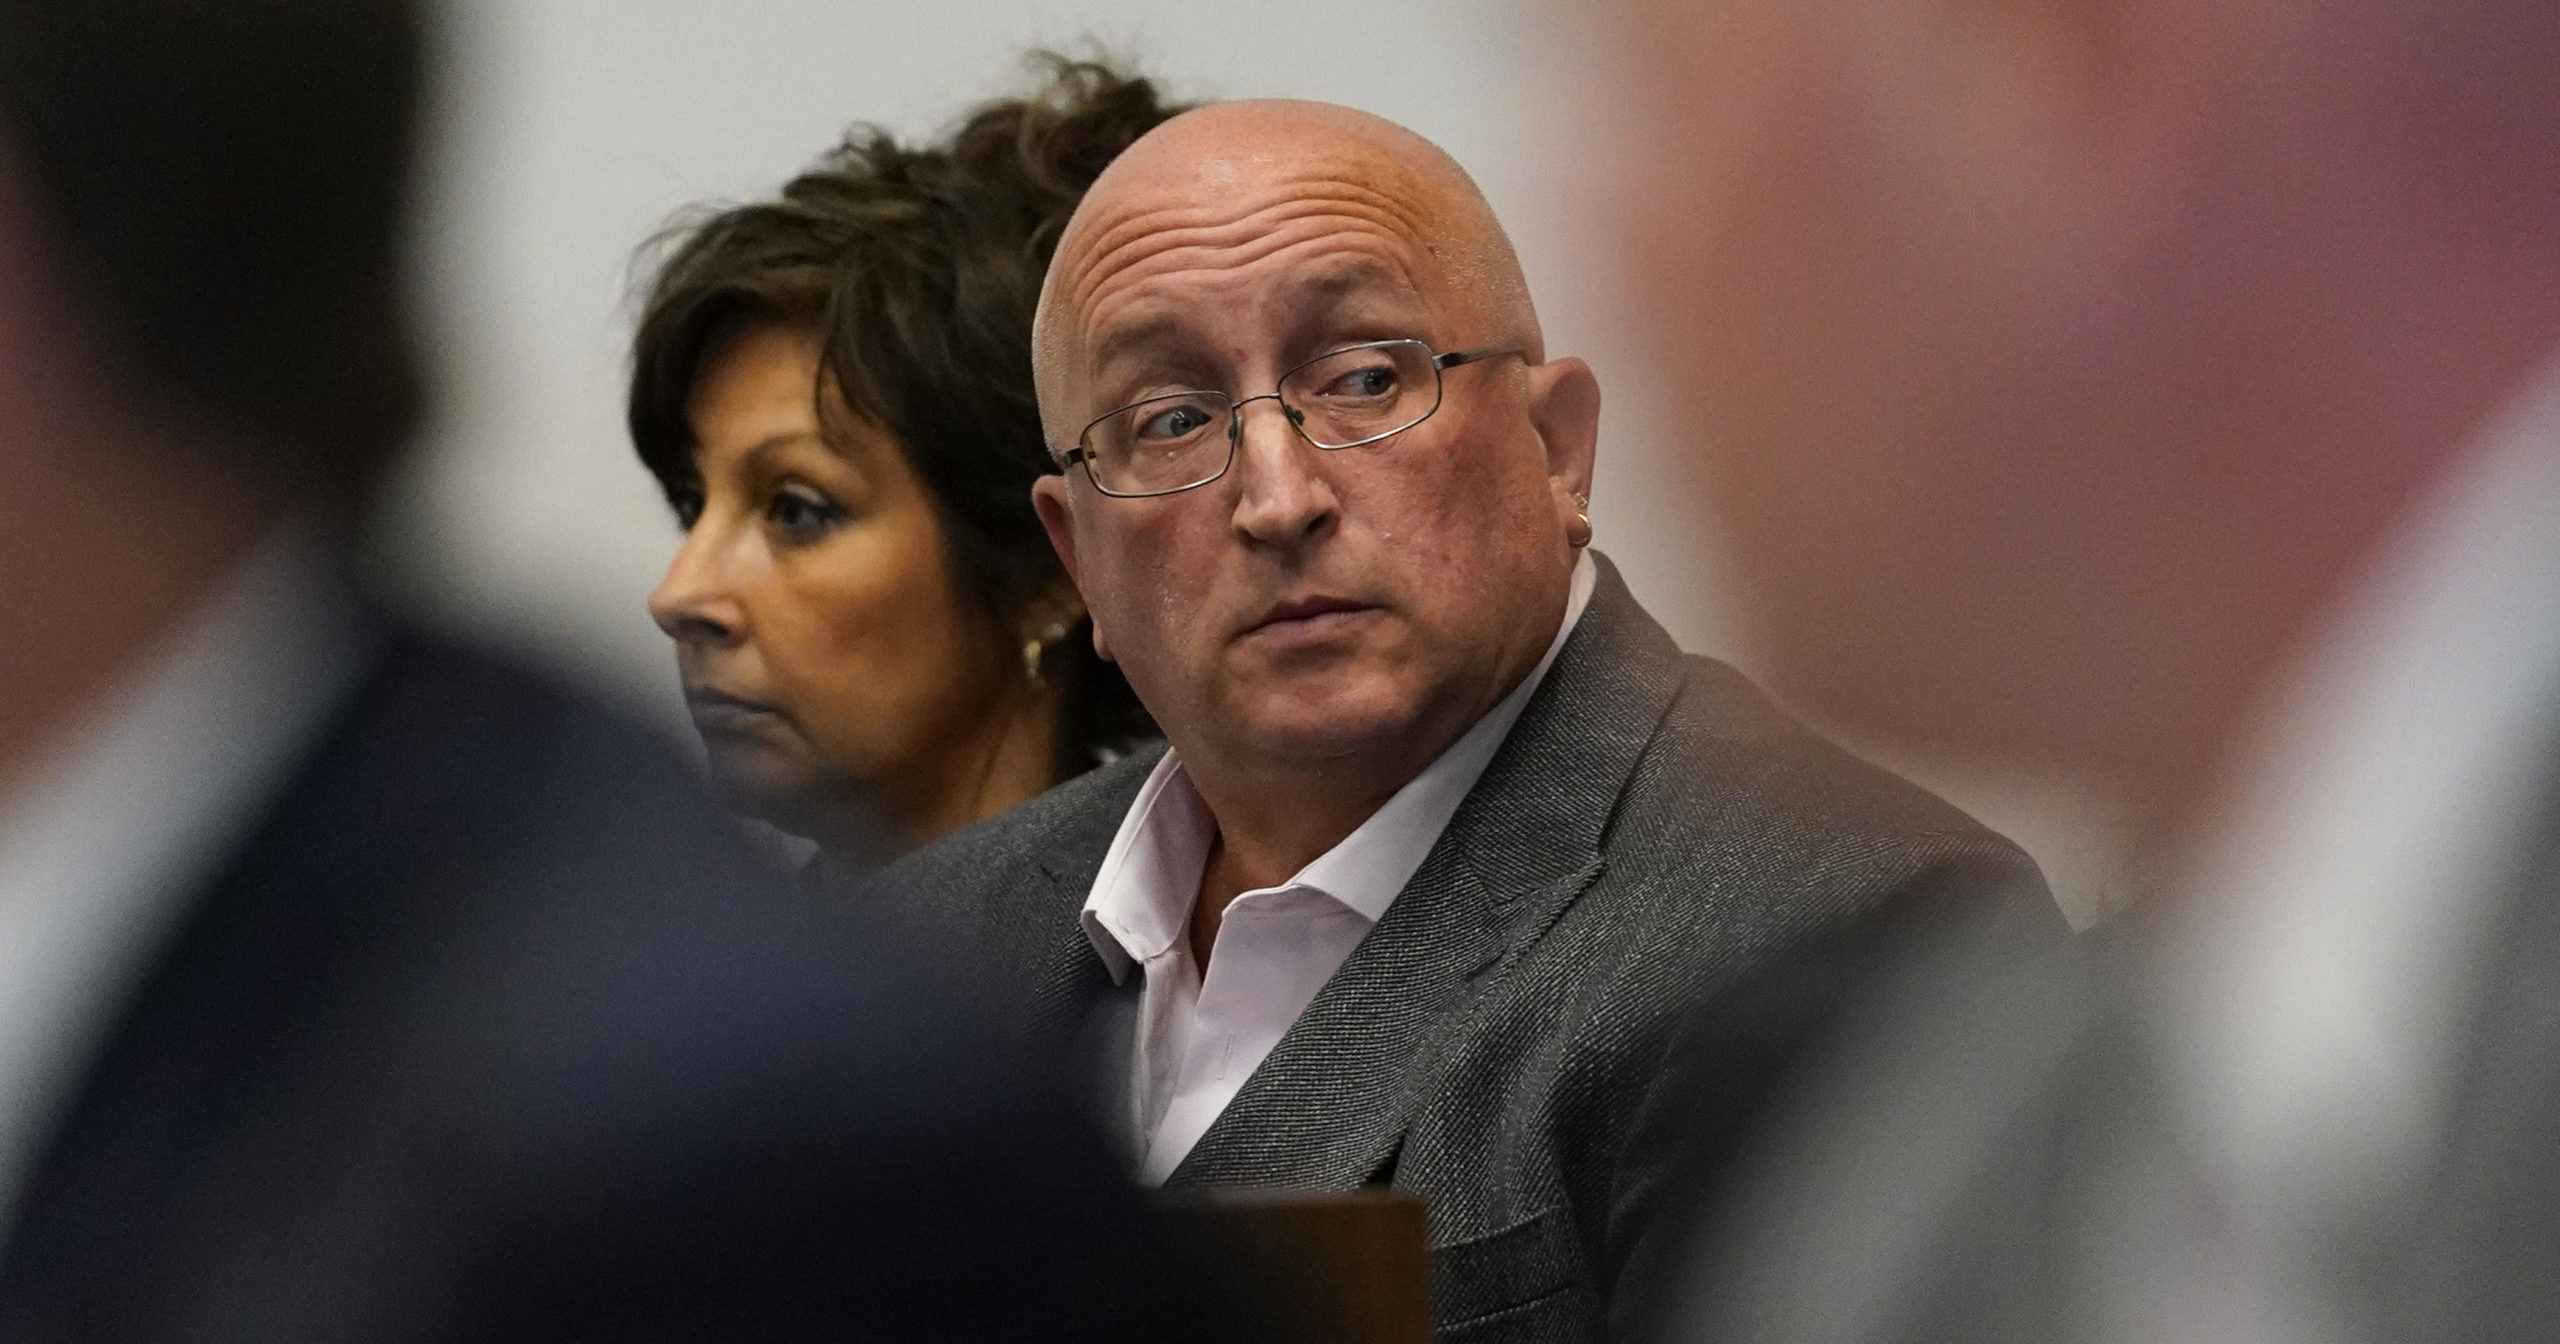 Robert E. Crimo III's father Robert Crimo Jr., right, and mother Denise Pesina attend to a hearing for their son in Lake County court on Aug. 3, 2022, in Waukegan, Illinois.